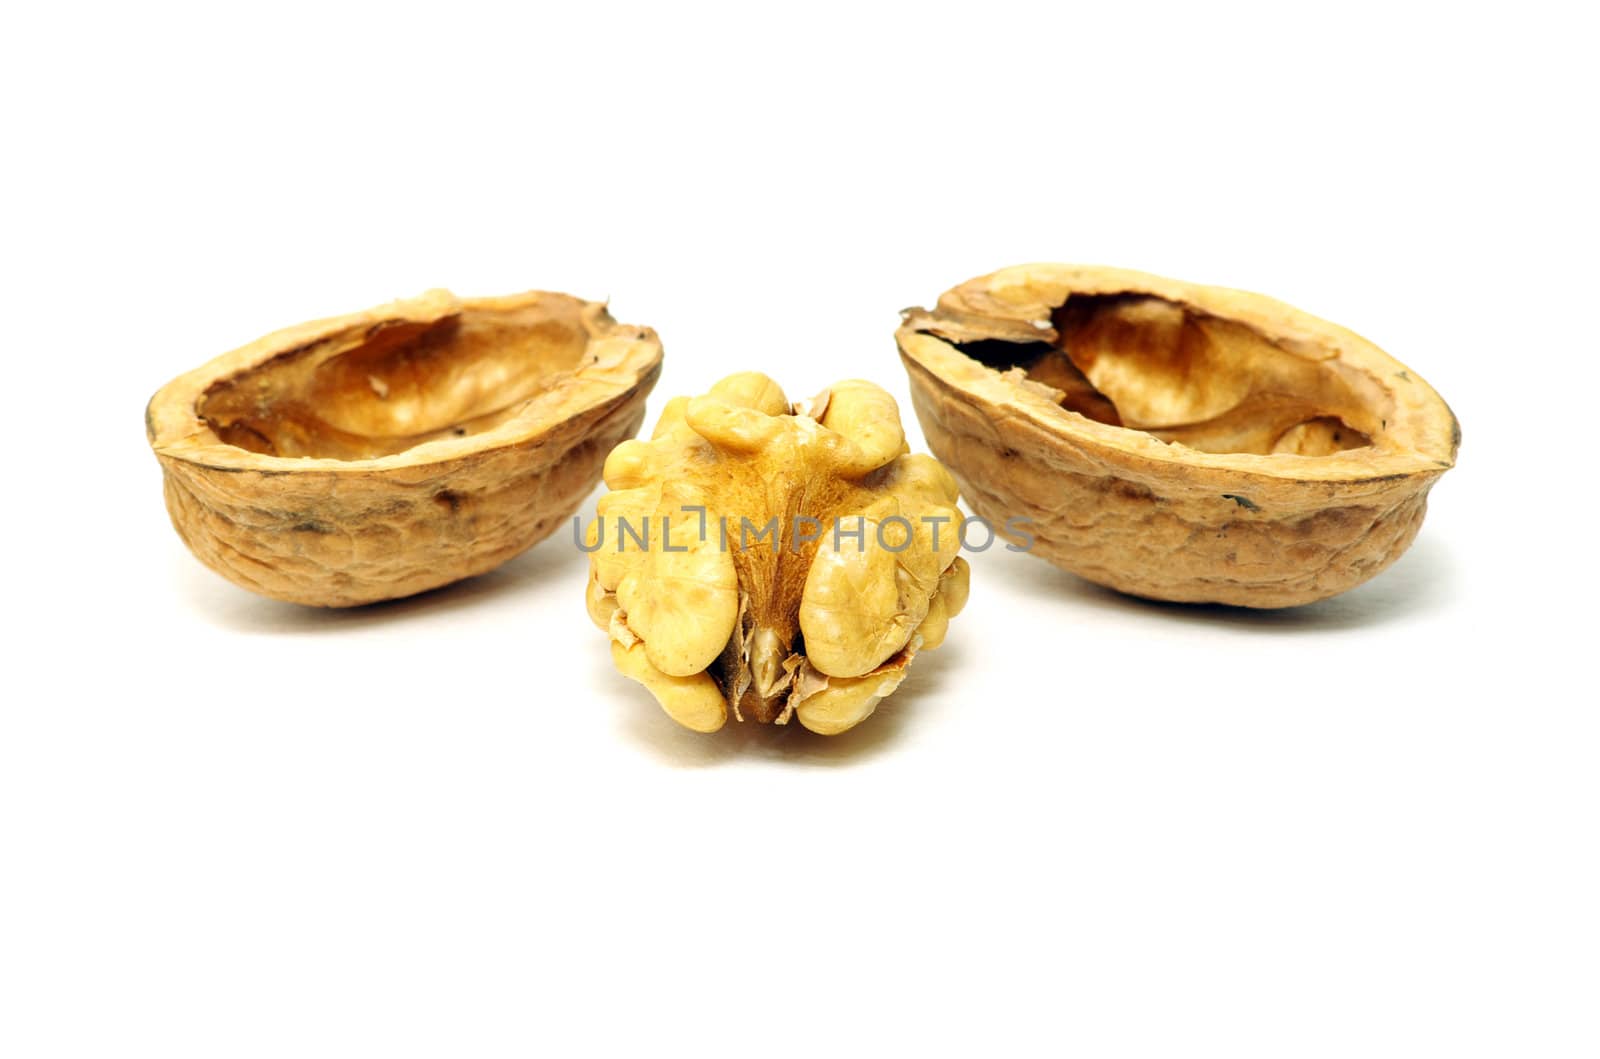  walnuts isolated on a white background